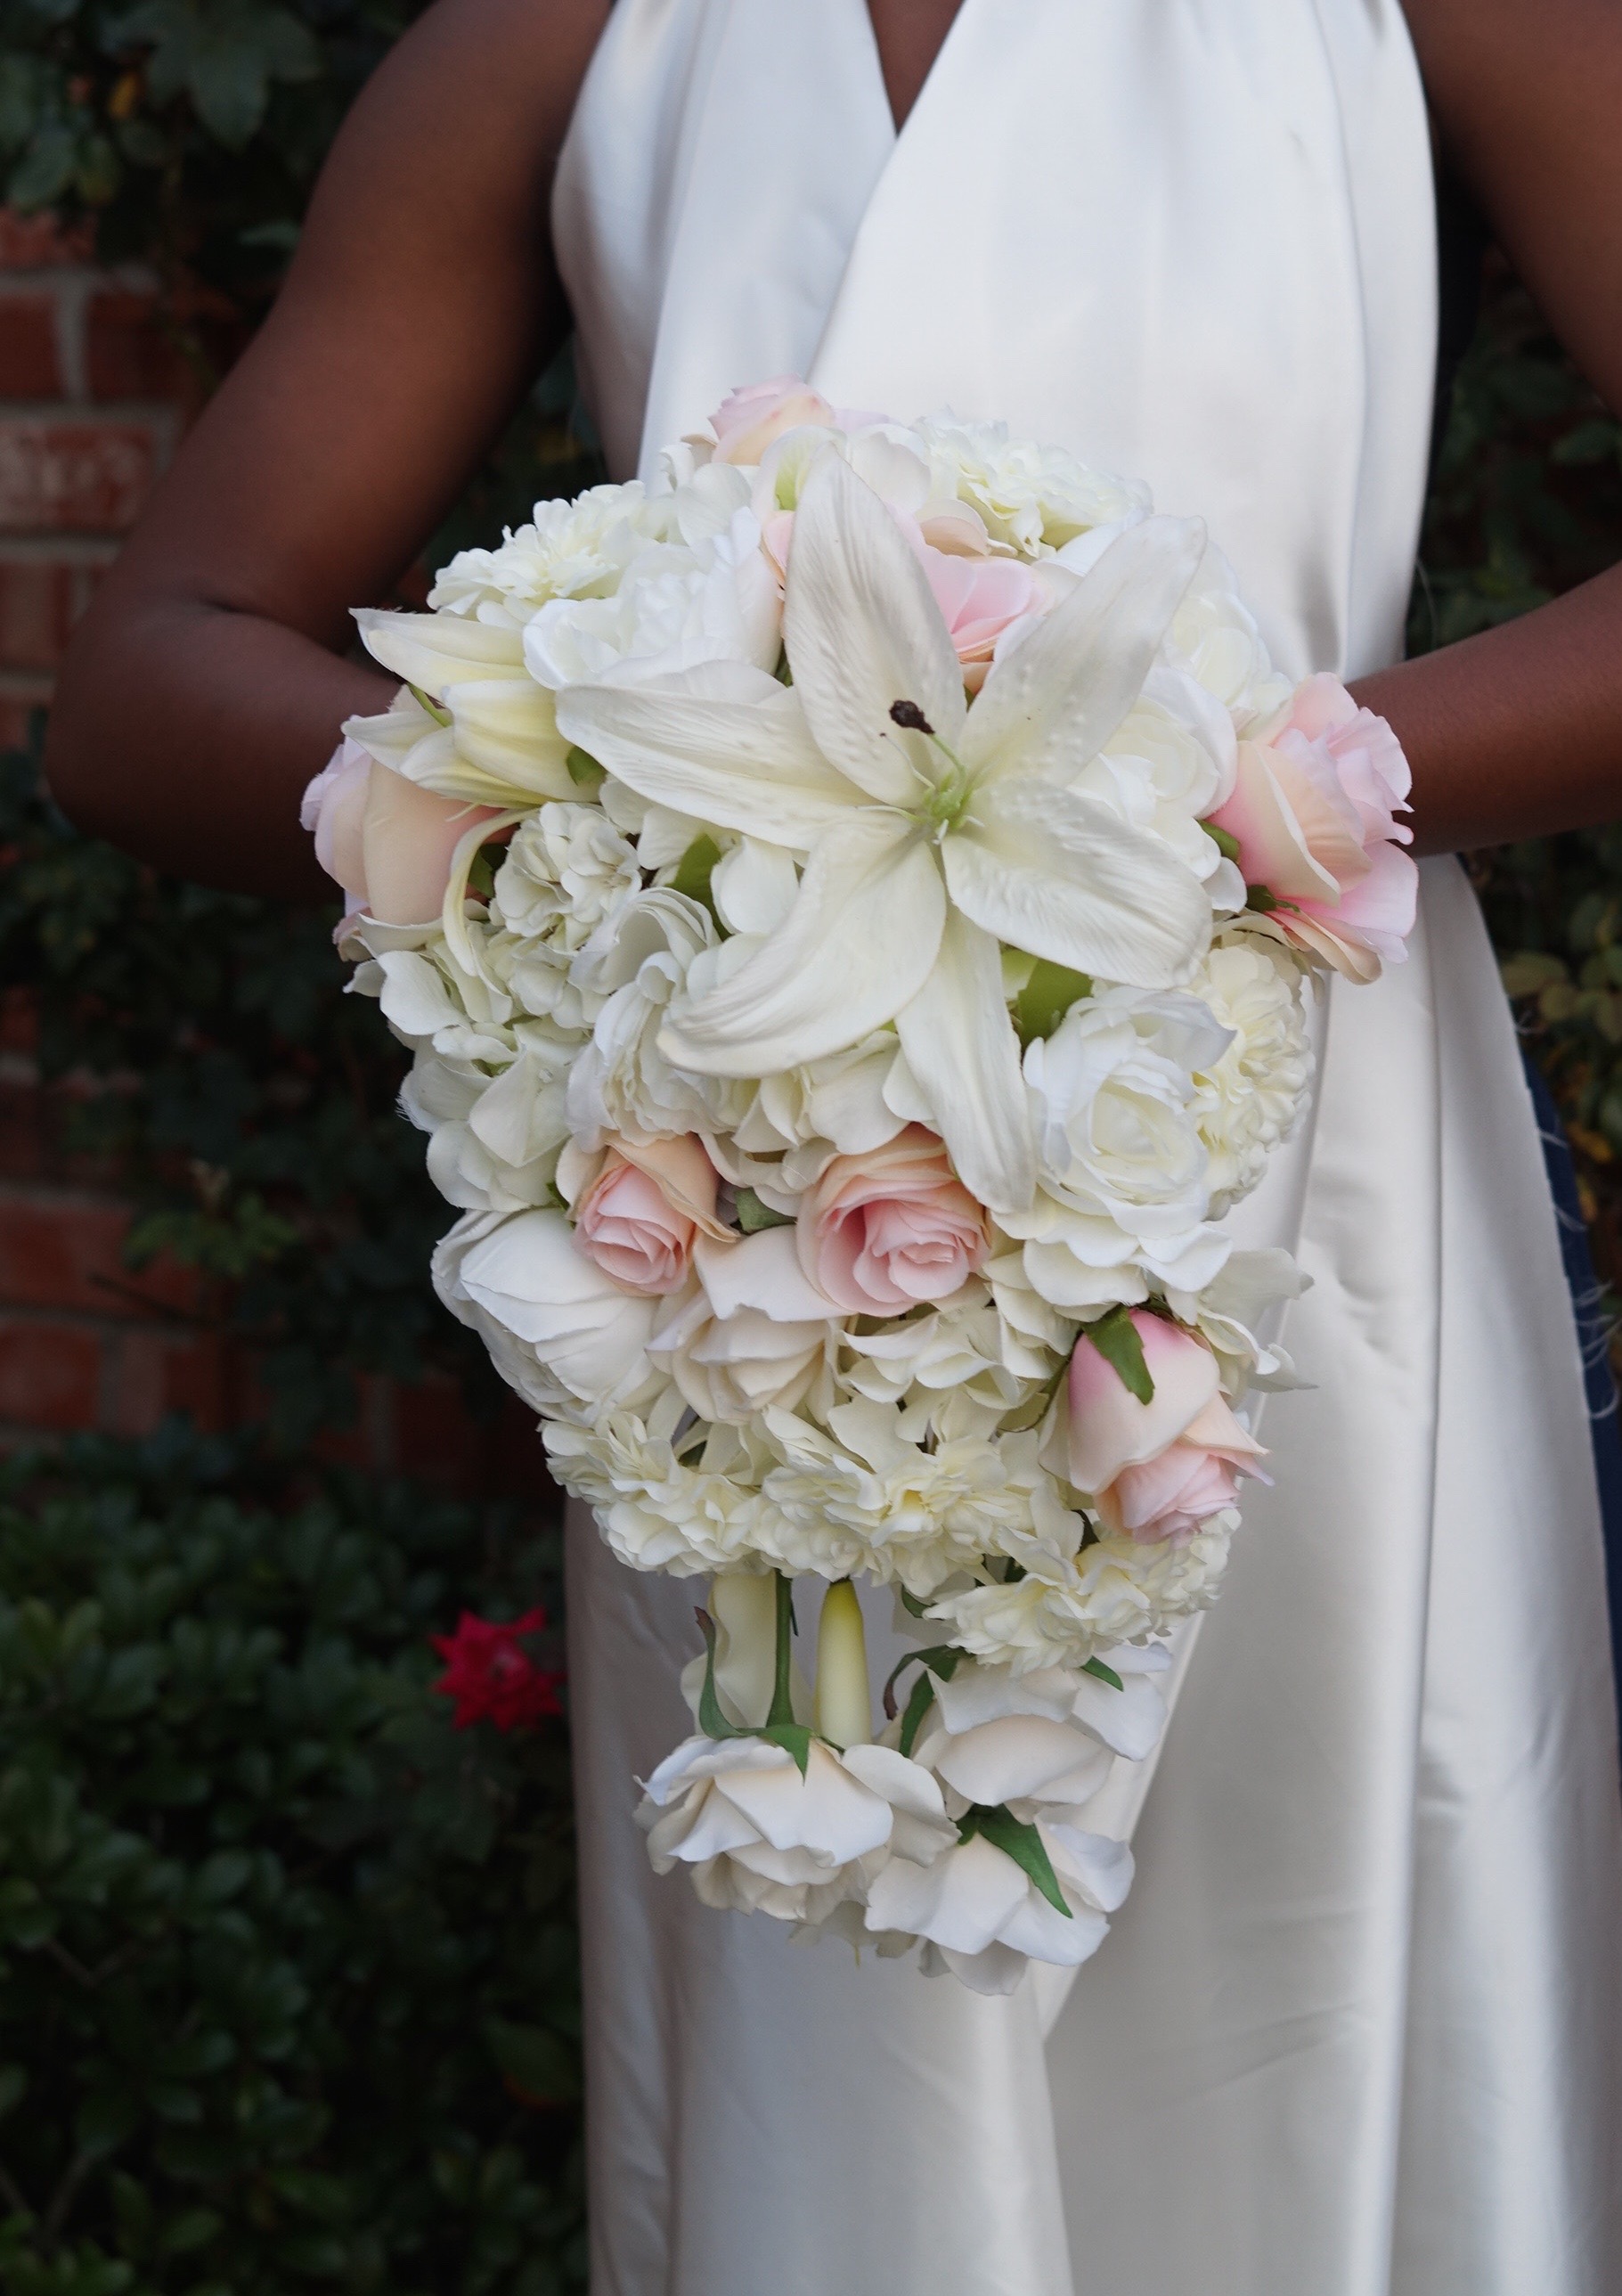 How To Make Cascading Bridal Bouquets With Artificial Flowers Best